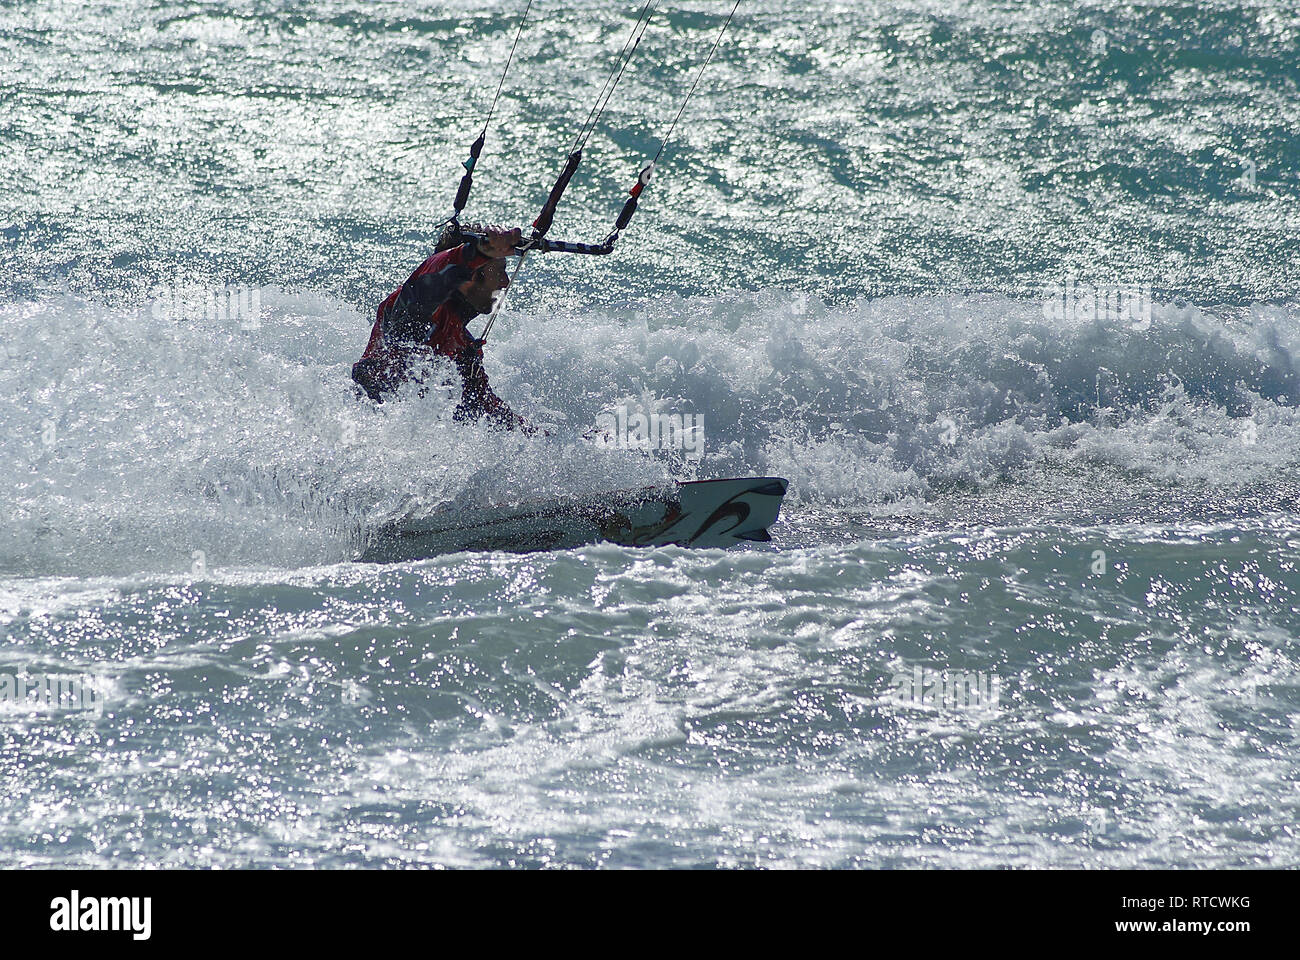 Kite boarder in the white foam during a windy day in french riviera Stock Photo